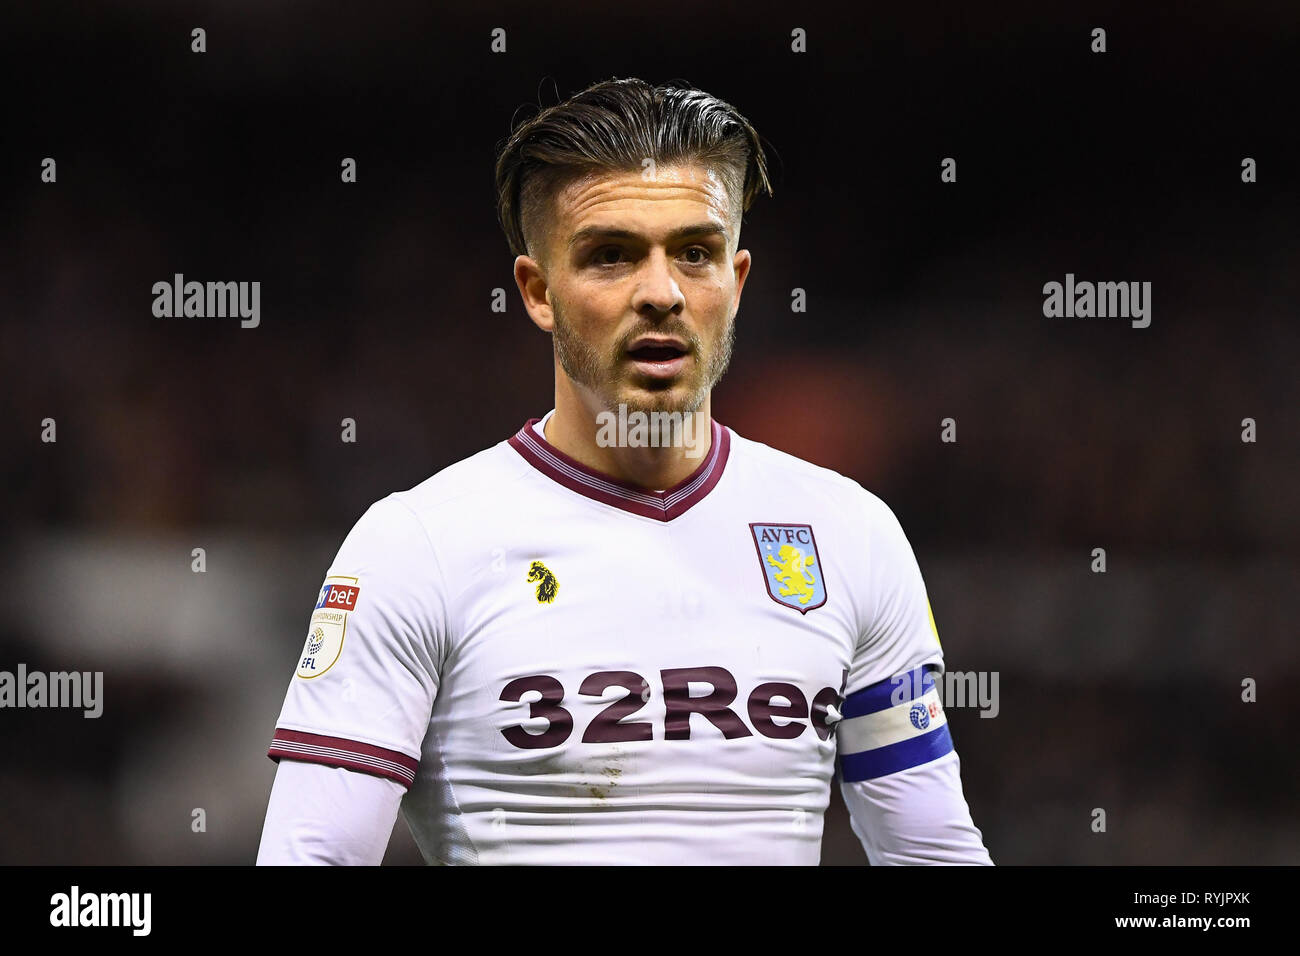 13th March 2019, City Ground, Nottingham, England ; Sky Bet Championship, Nottingham Forest v Aston Villa : Jack Grealish (10) of Aston Villa   Credit: Jon Hobley/News Images  English Football League images are subject to DataCo Licence Stock Photo